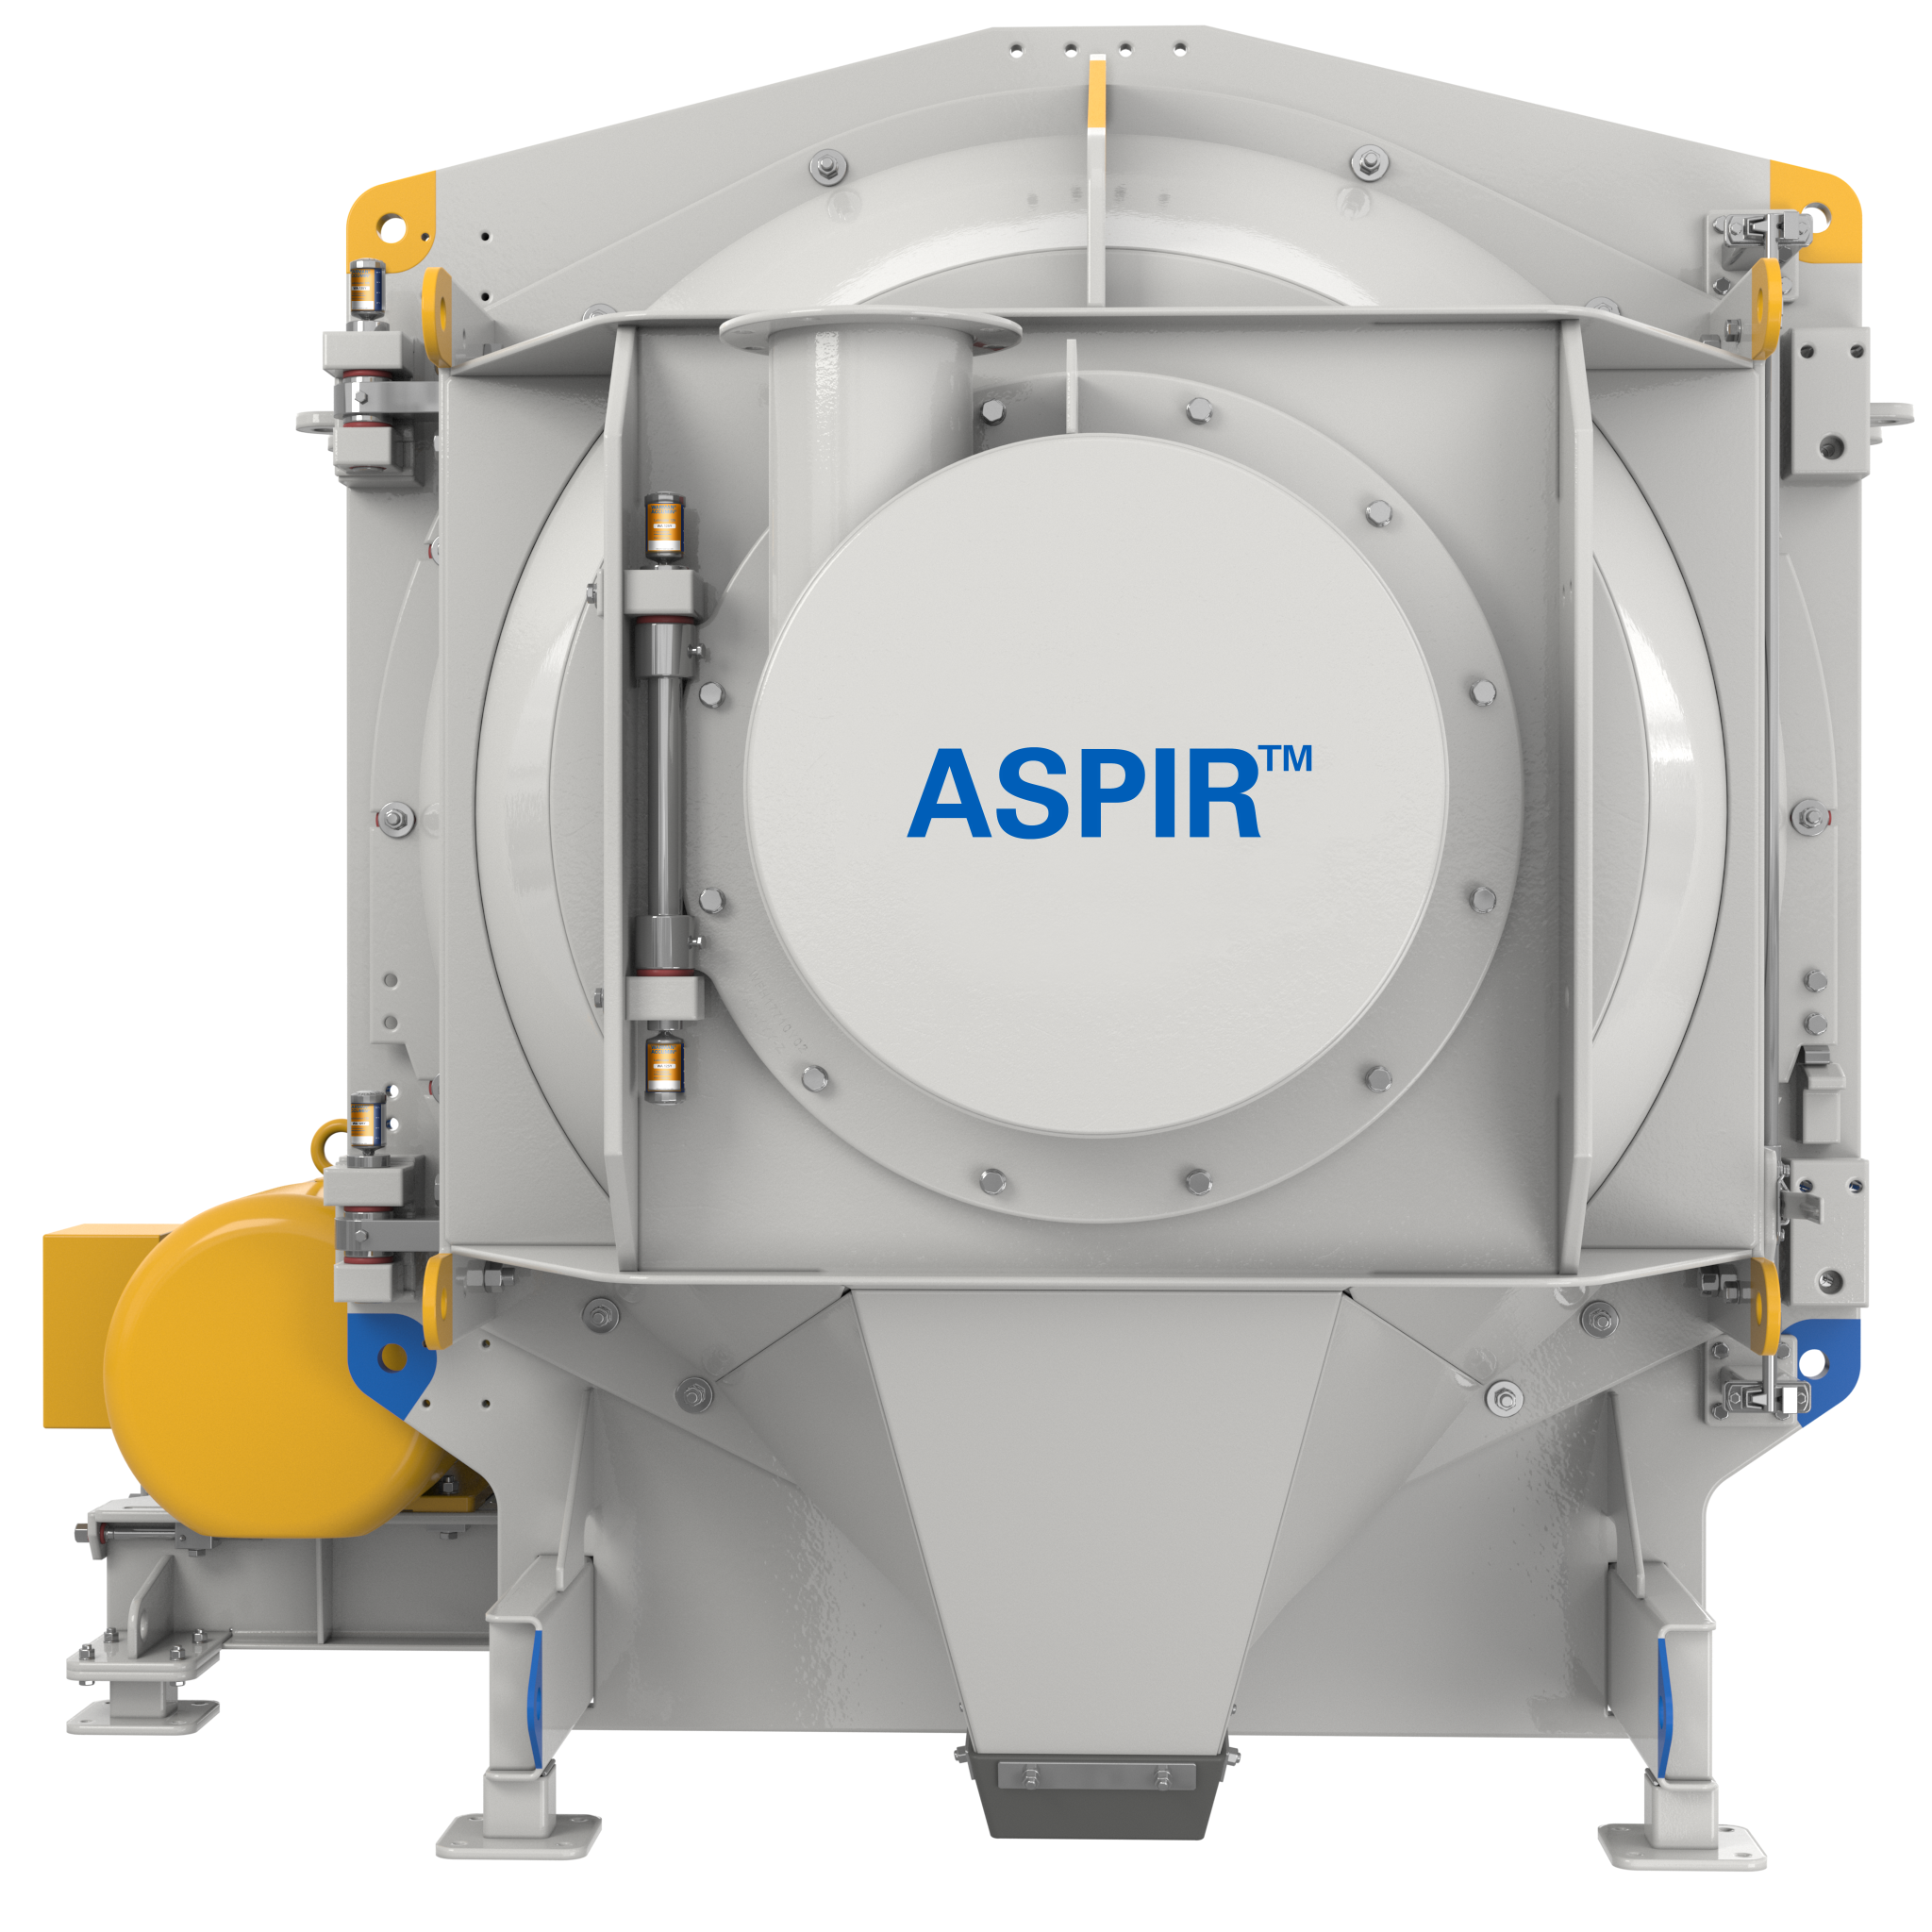 The new Aspir WFH1730 jumbo centrifuge is engineered and sized to process 100tph of fine coal product.